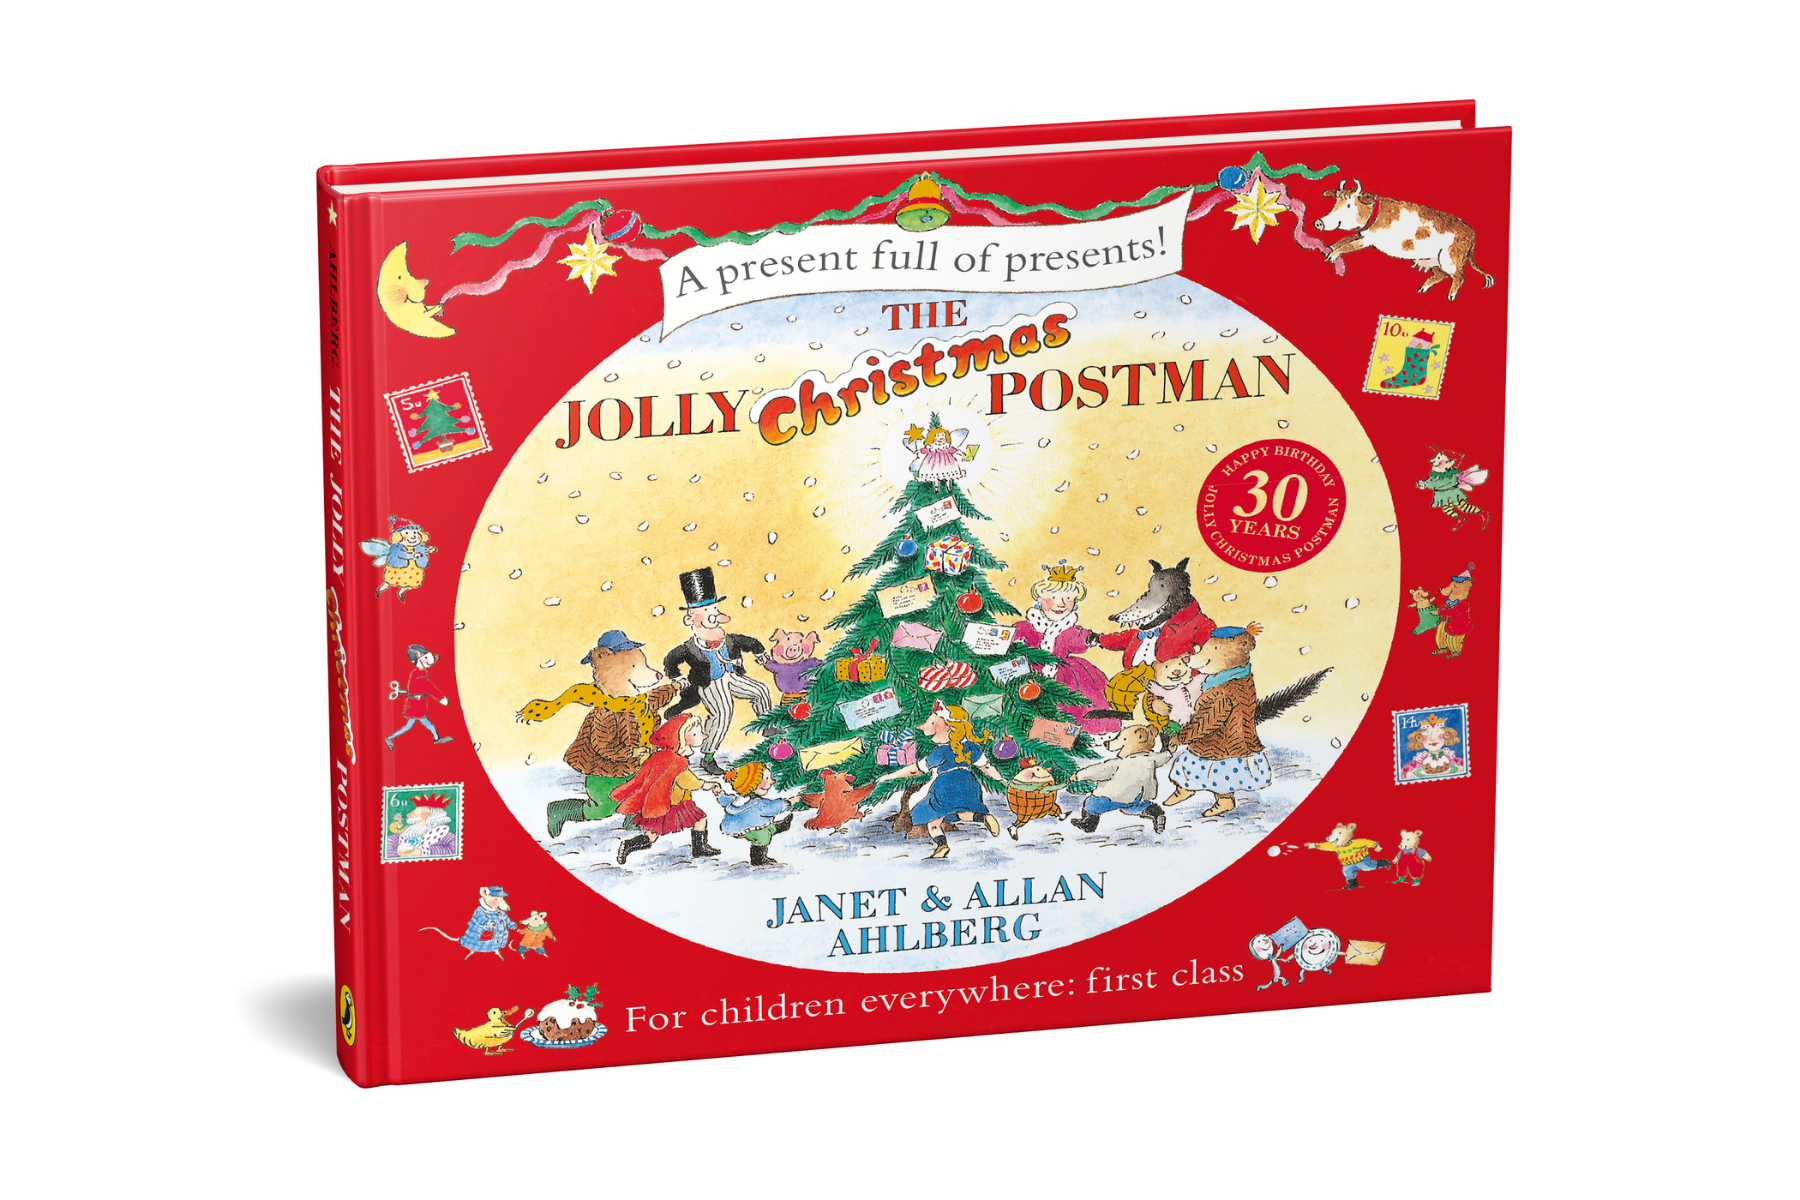 A photo of the book The Jolly Christmas Postman on a white background